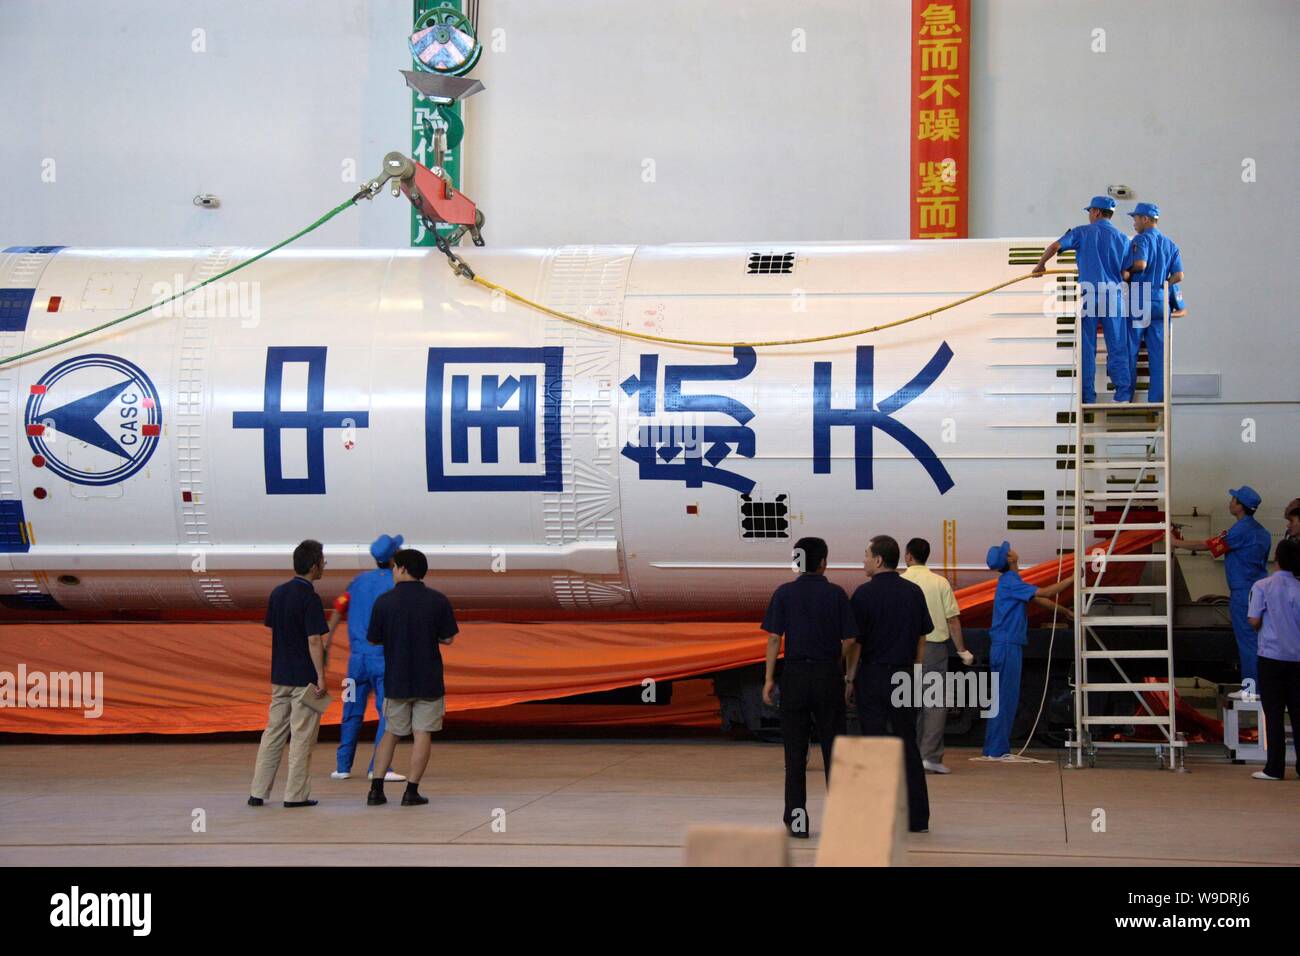 Chinese aeronautical scientists unload the second stage of a Long March 2F (CZ-2F) rocket during the preparation for the Shenzhou VII manned spaceflig Stock Photo